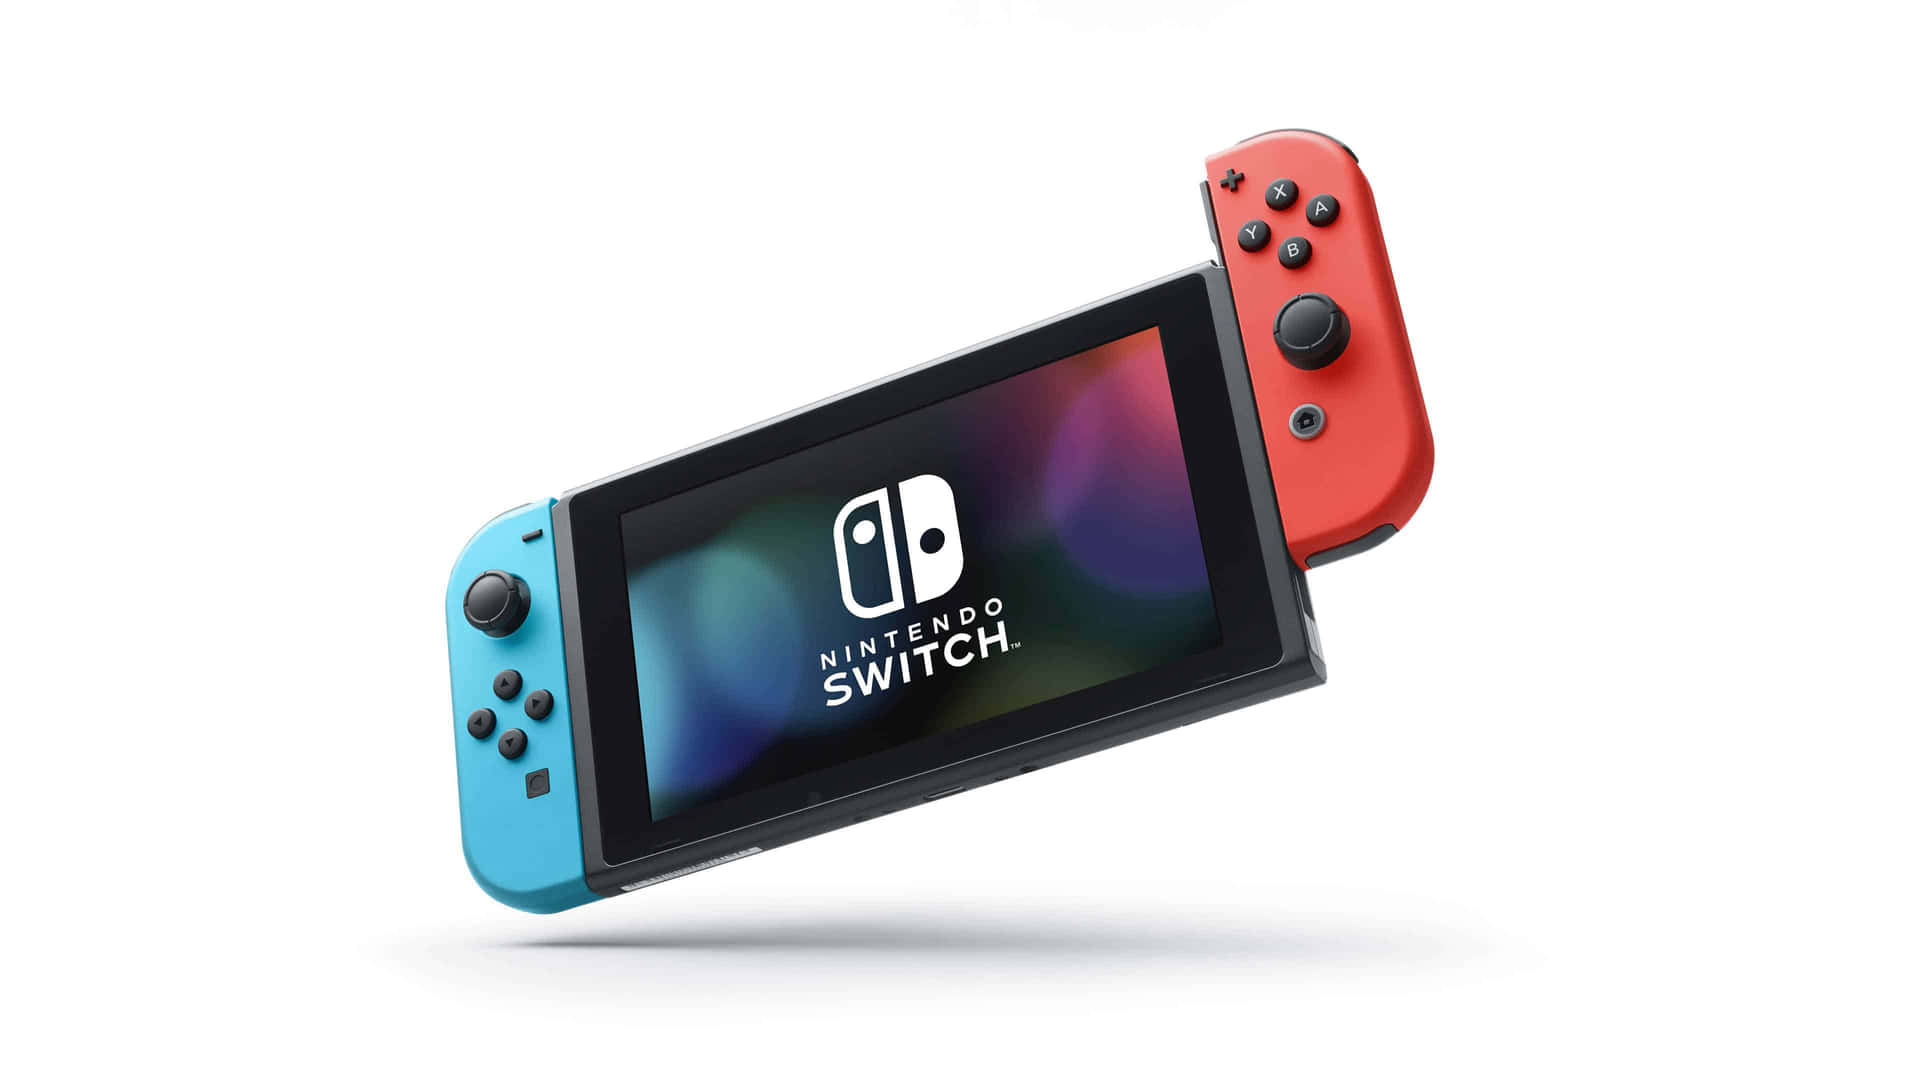 Hand-held fun for the whole family with Nintendo Switch